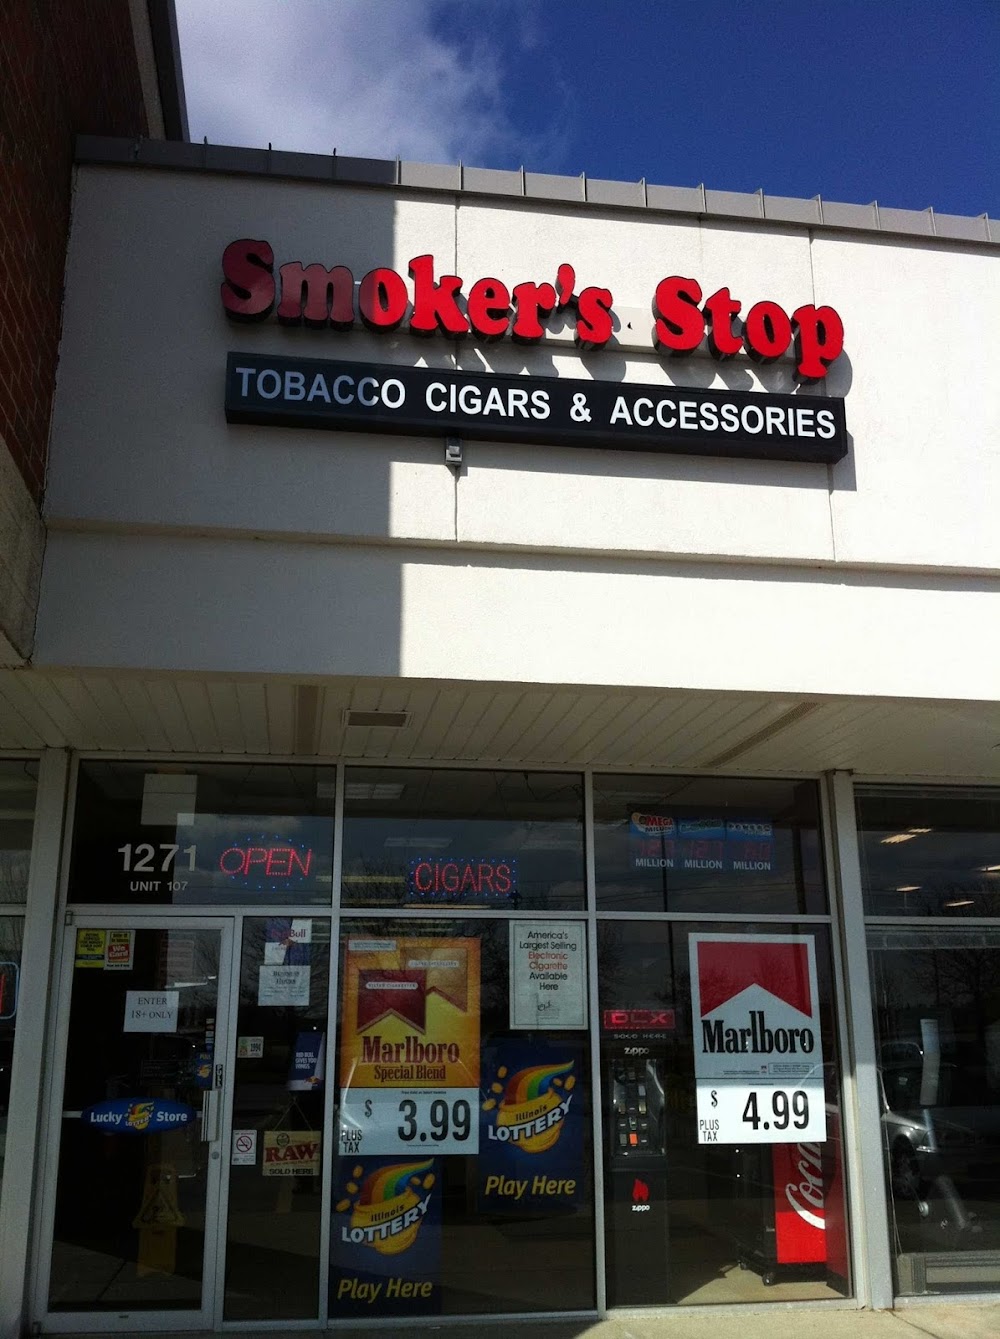 Smoker’s Stop (Tobacco Cigars and Accessories)